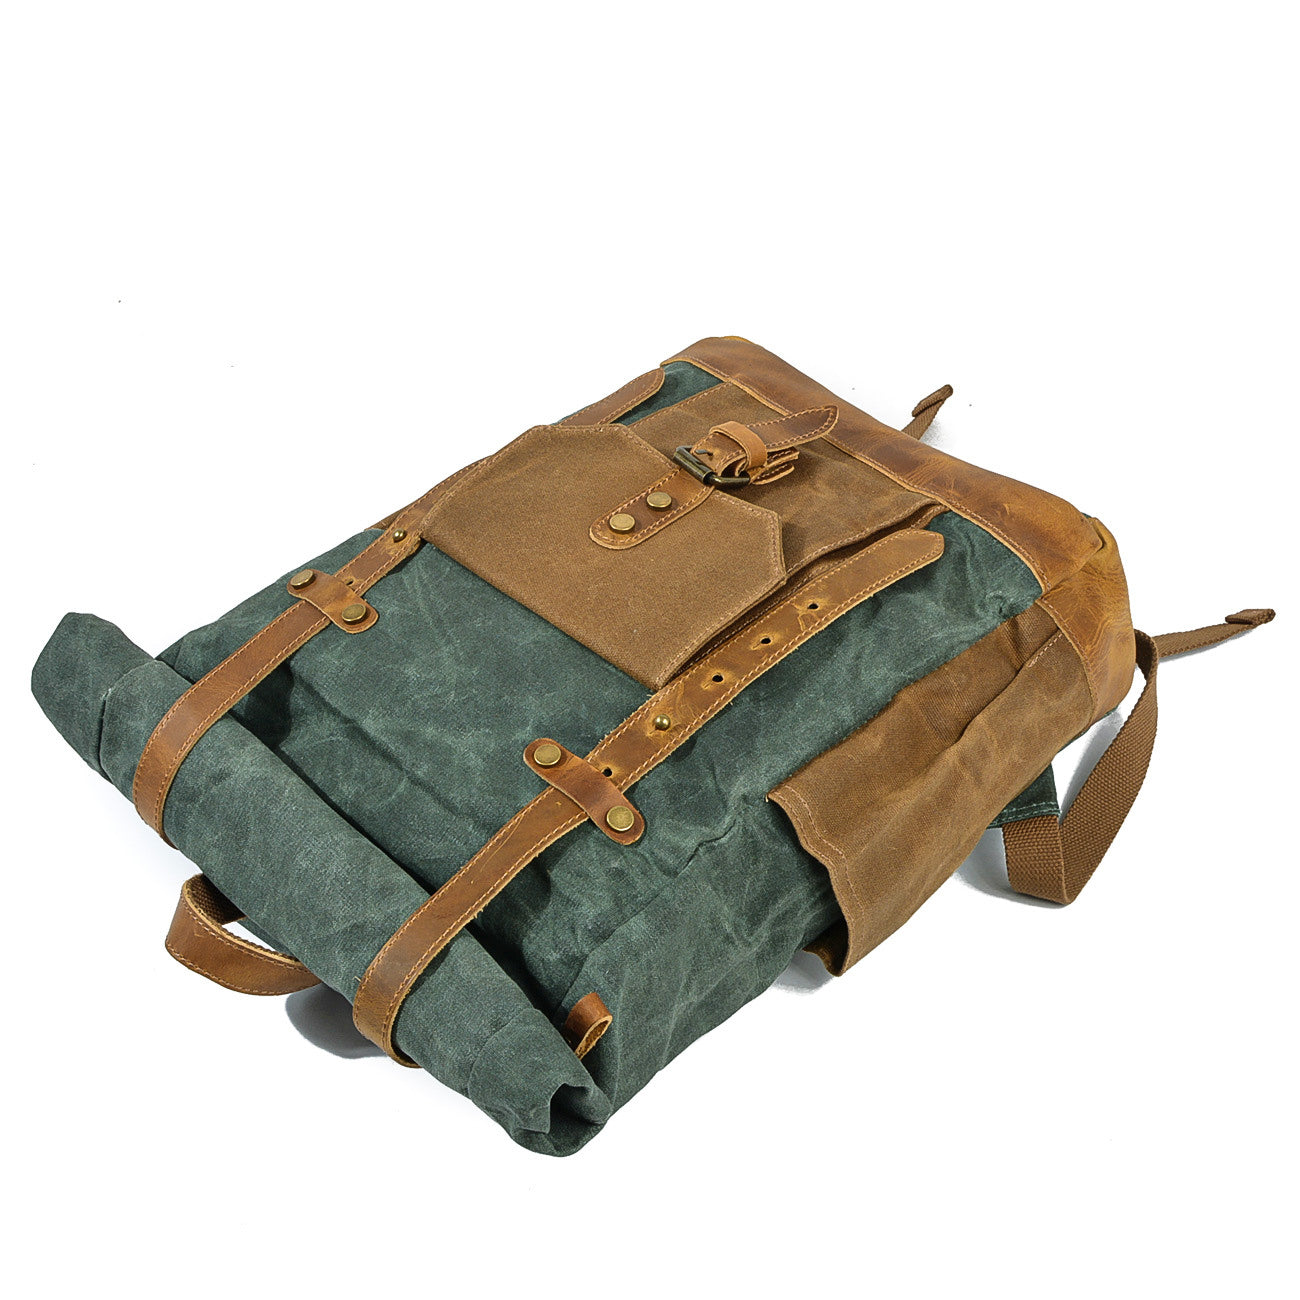 Roll Top Waxed Canvas Backpack Vintage for Men